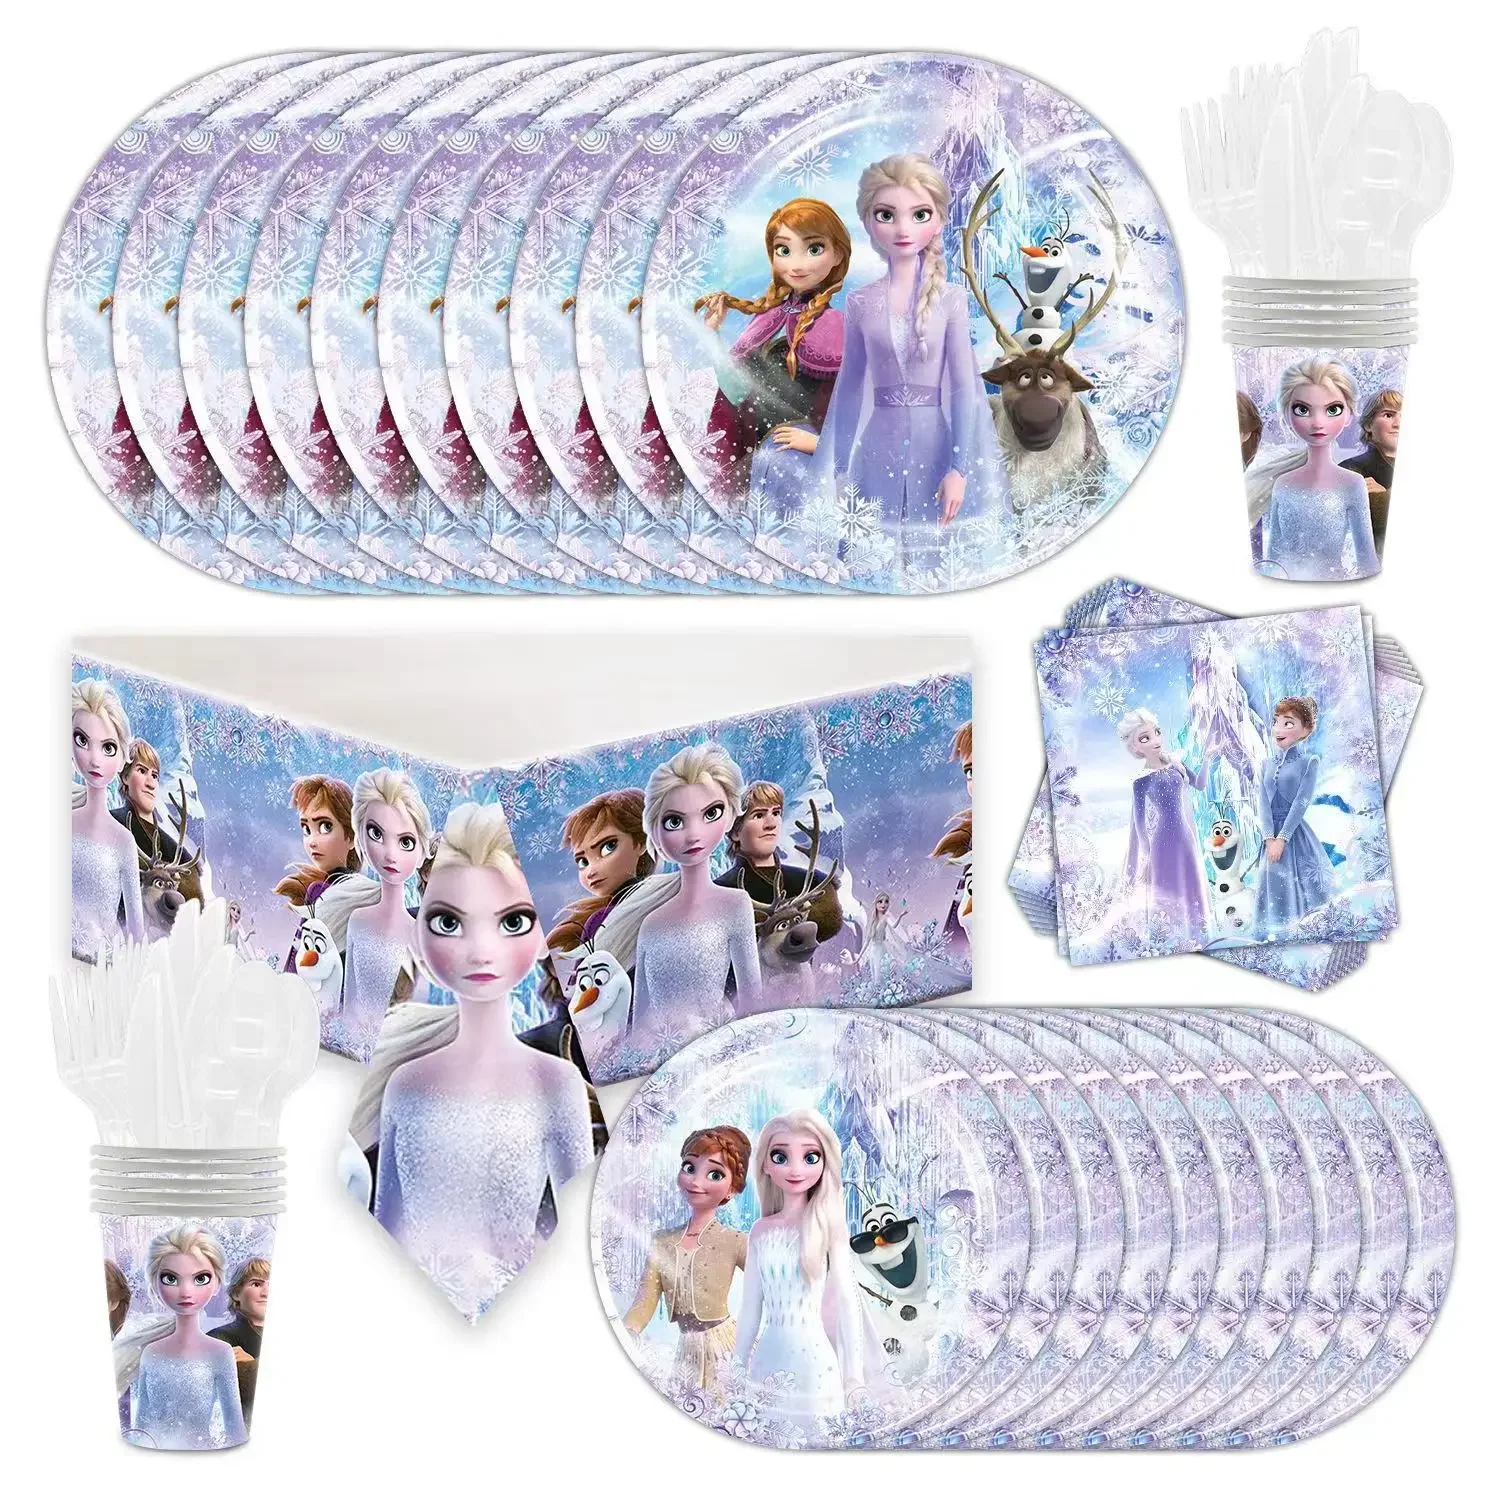 Disney Frozen Elsa Anna Princess Girl Favor Birthday Party Decor Disposable Tableware Cup Plate Straw Banner Balloon Supplies mermaid birthday party supplies disposable tableware cup plate paper towel straw banner sets kids parties favors decorations